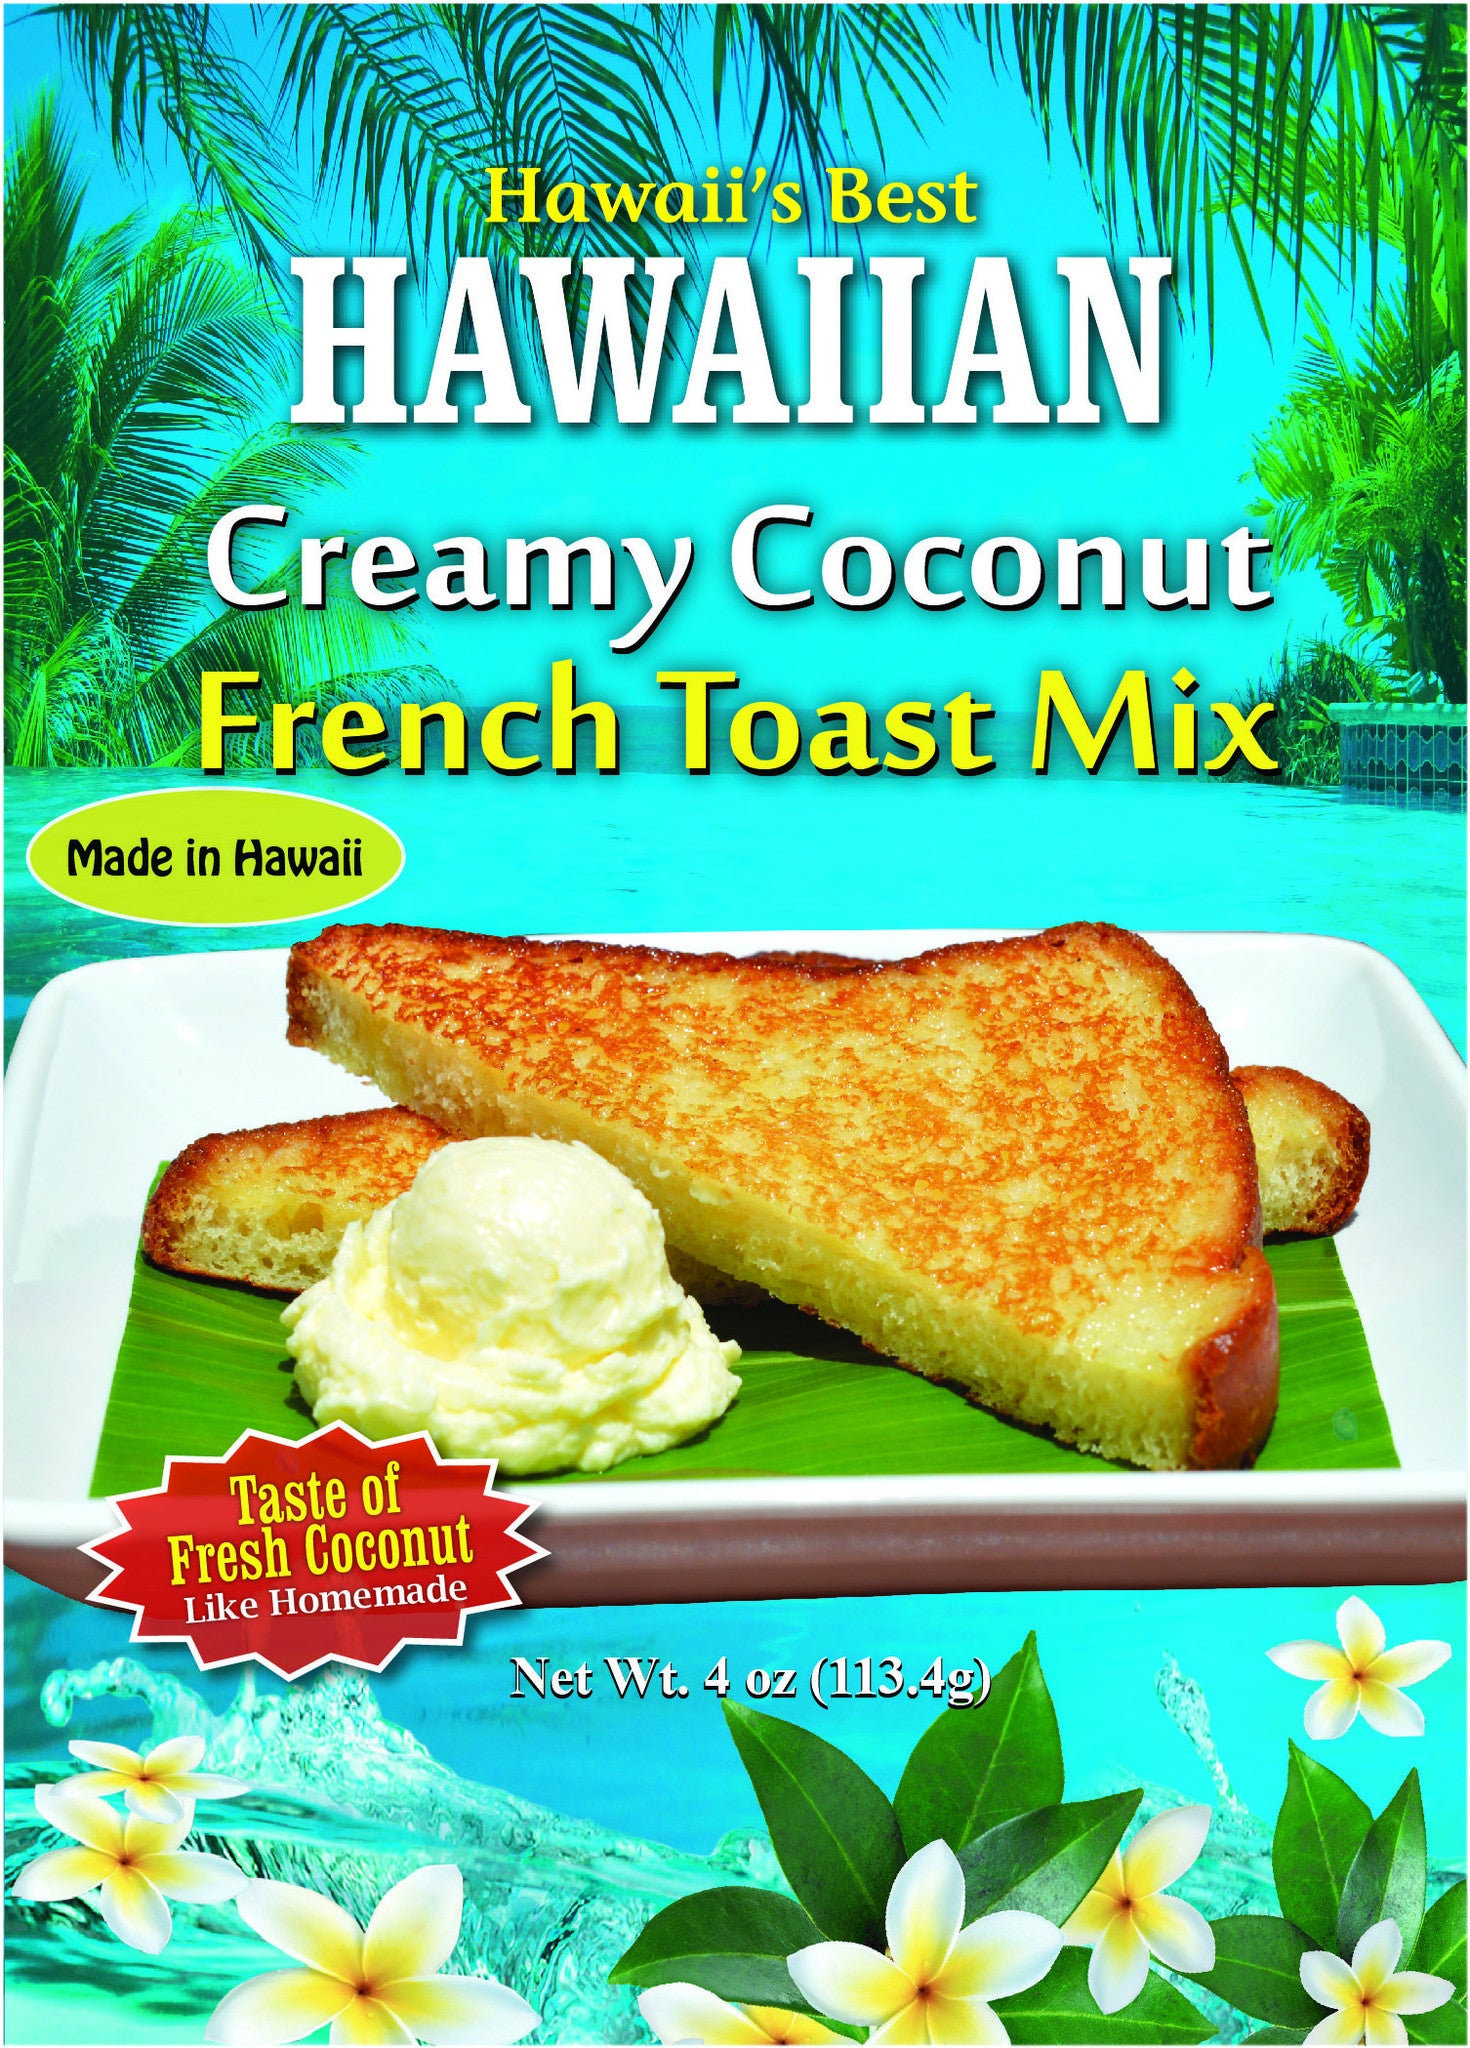 (5 BAGS - EXTRA VALUE PACK, 3.49 EACH) CREAMY COCONUT COCONUT FRENCH TOAST MIX (4 oz package).  Makes approx 12 slices of French Toast